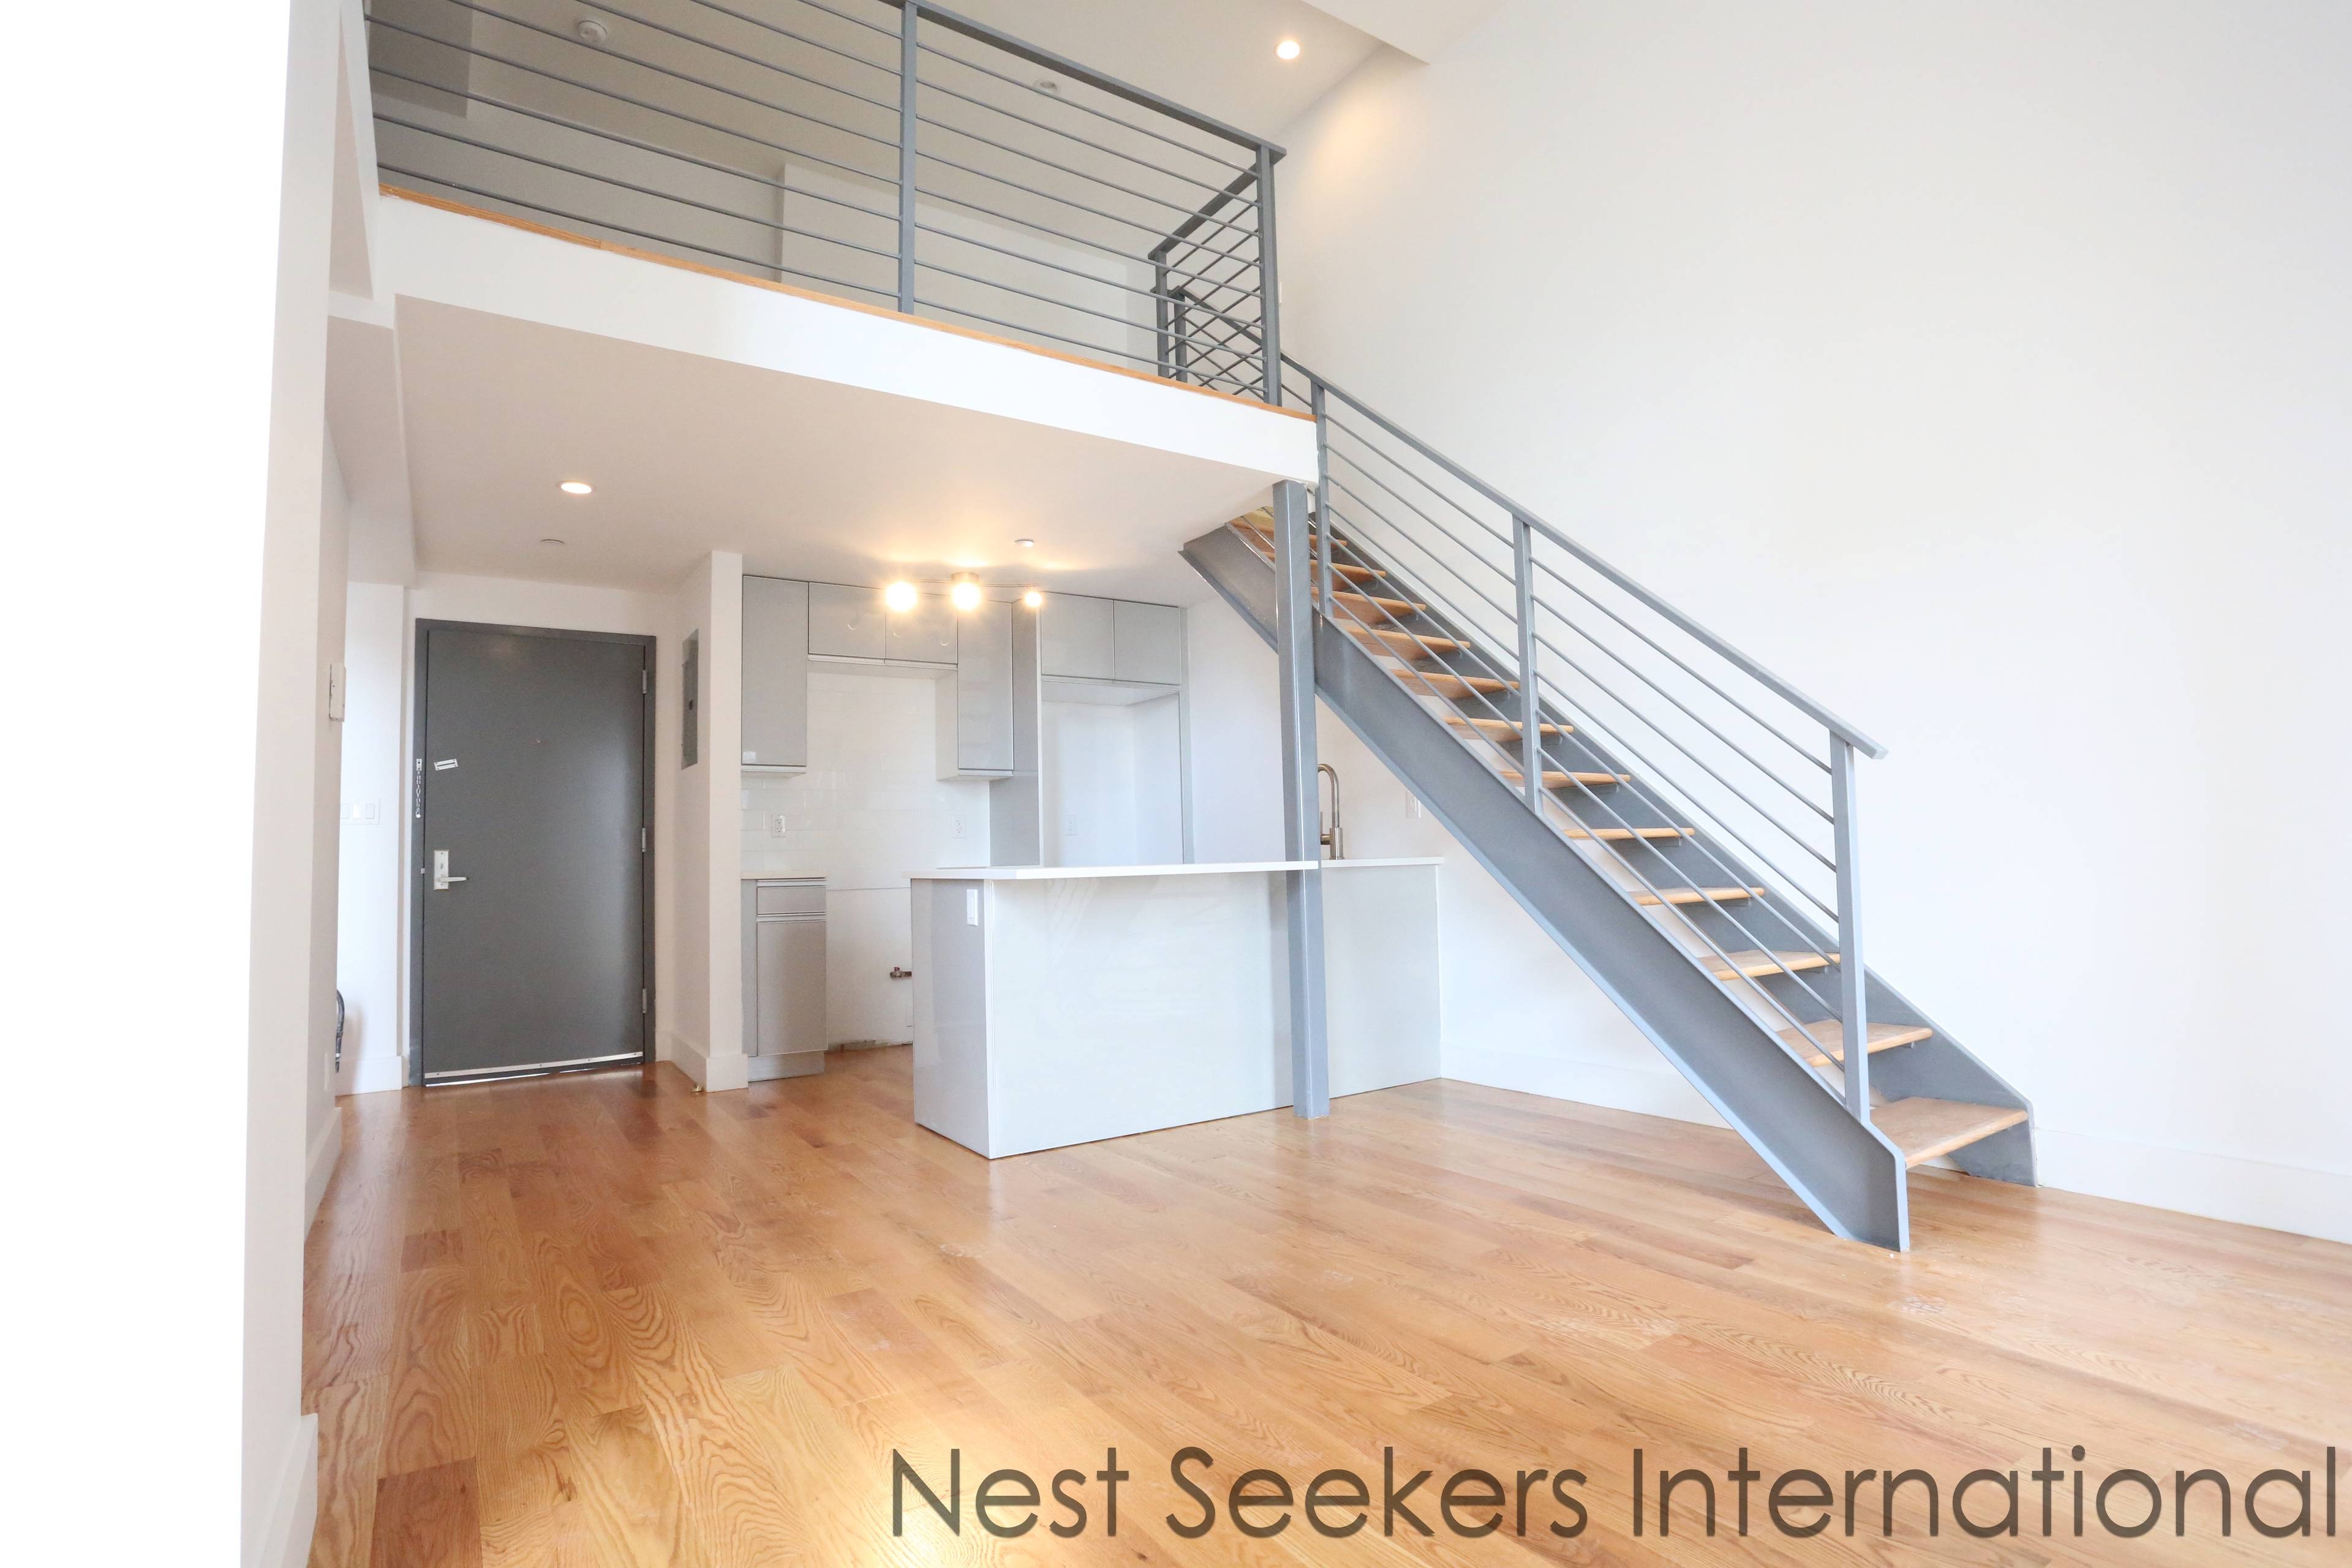 INCREDIBLE 2 BED LOFT STYLE apartment with 2 PRIVATE TERRACES in a BRAND NEW DEVELOPMENT in CLINTN HILL, BK!